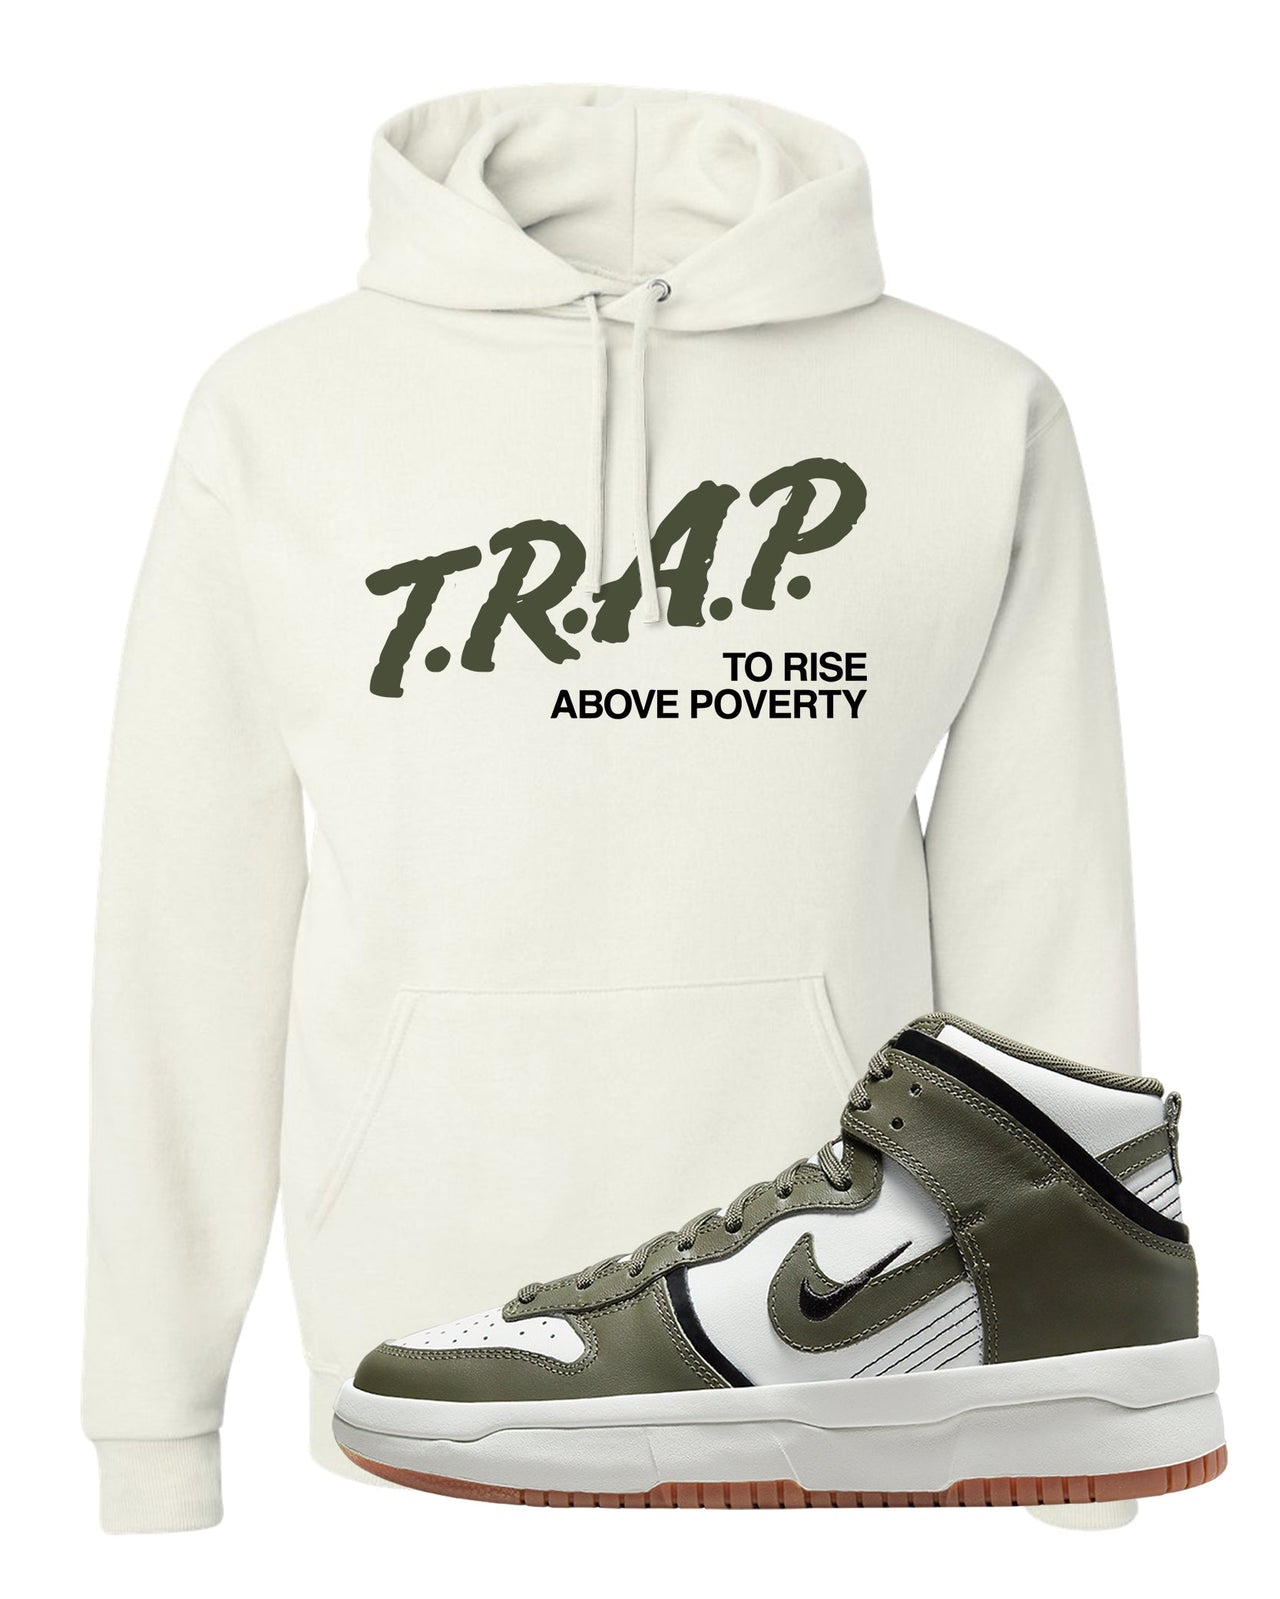 Cargo Khaki Rebel High Dunks Hoodie | Trap To Rise Above Poverty, White